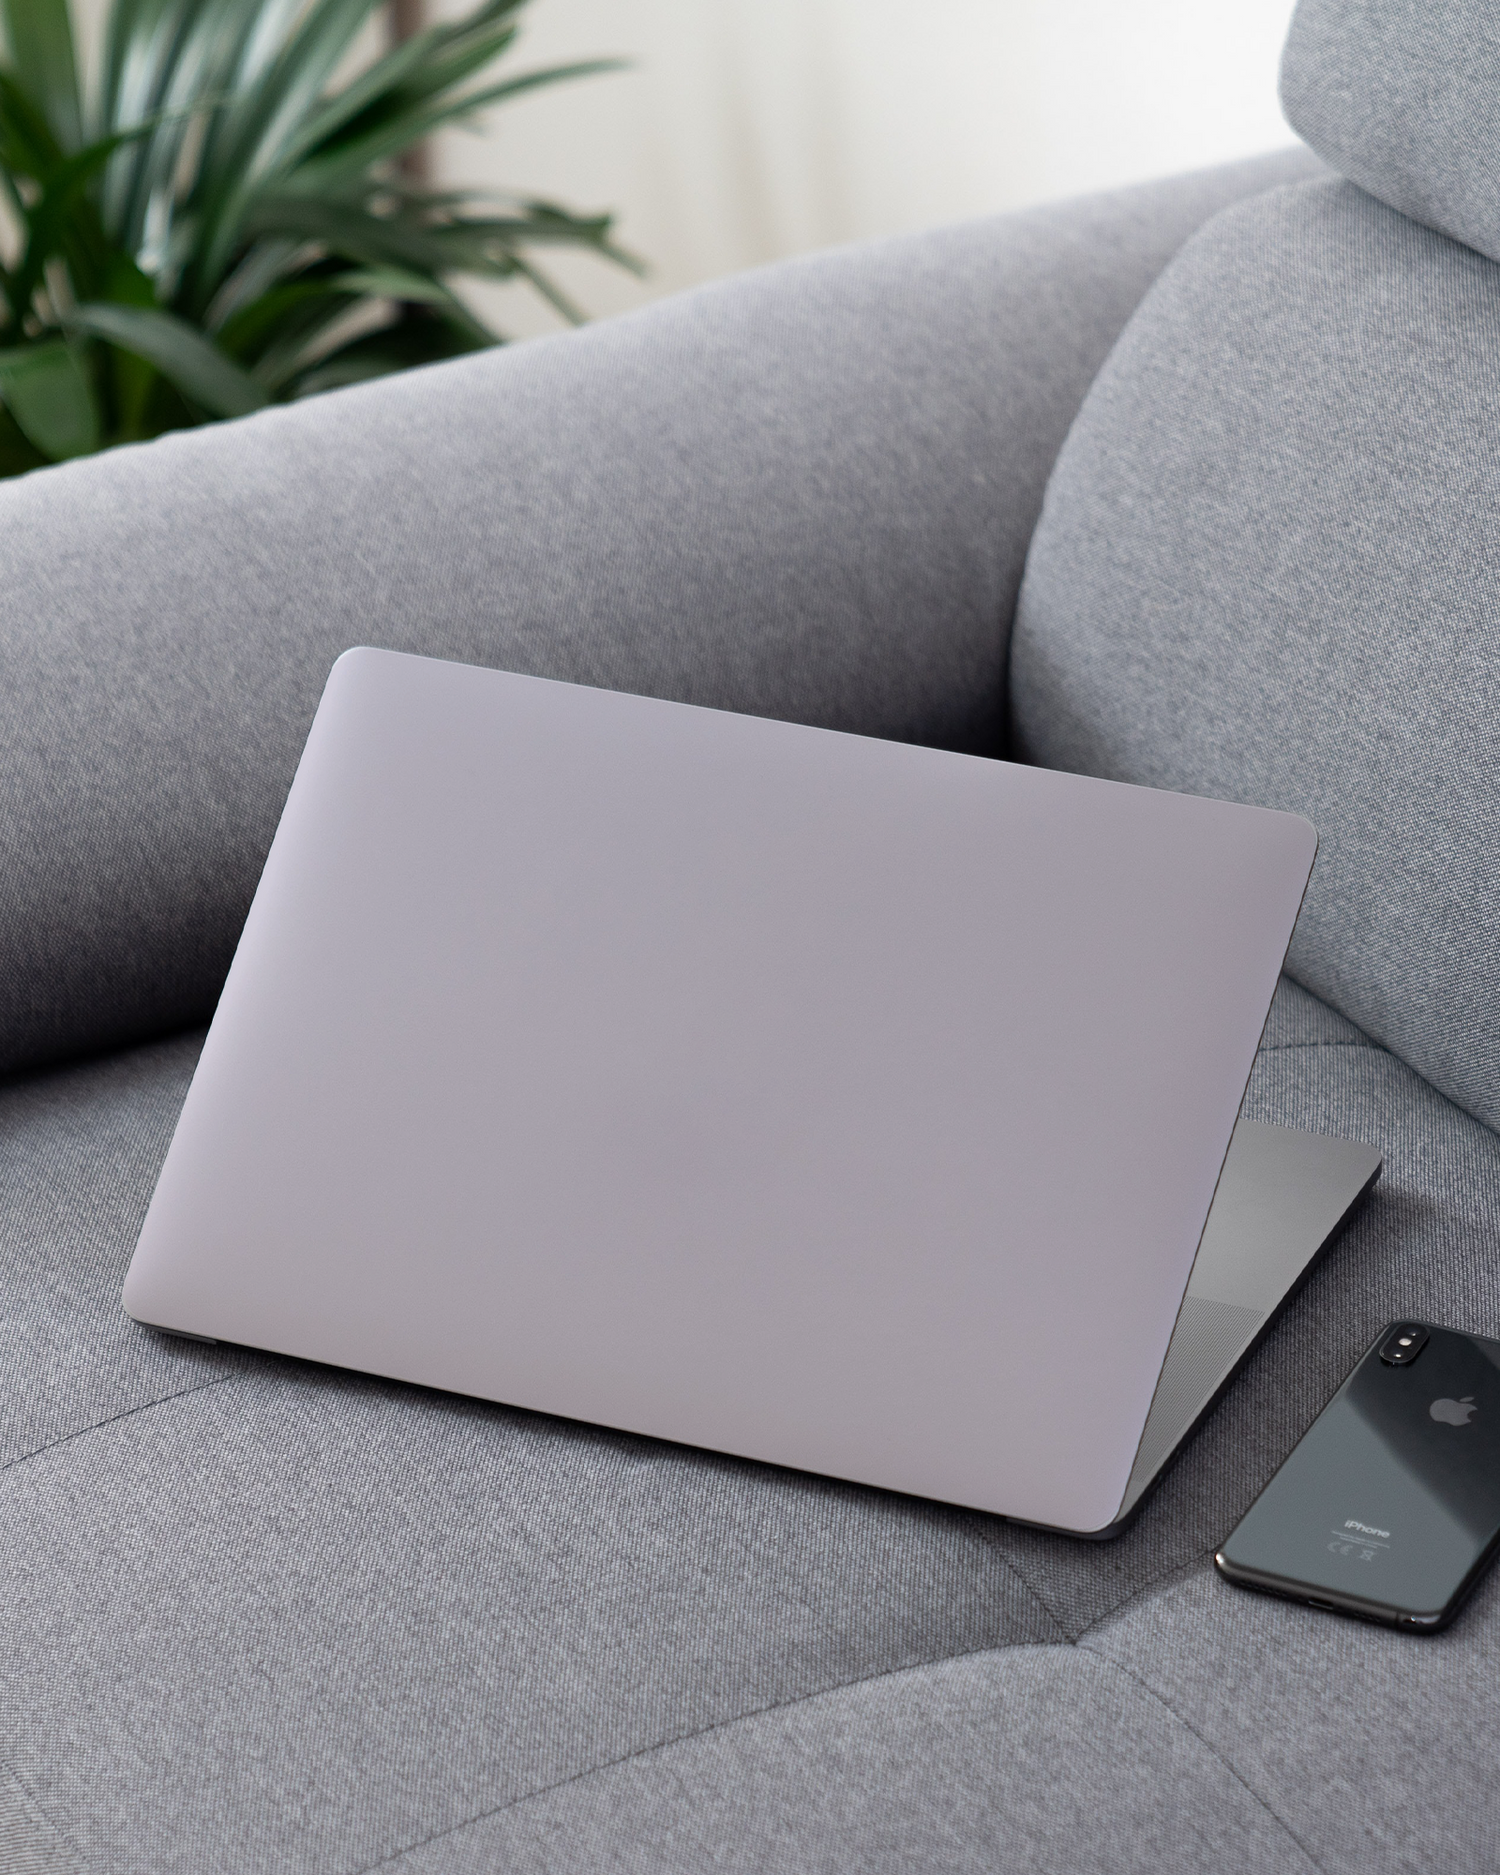 LIGHT PURPLE Laptop Skin for 13 inch Apple MacBooks on a couch